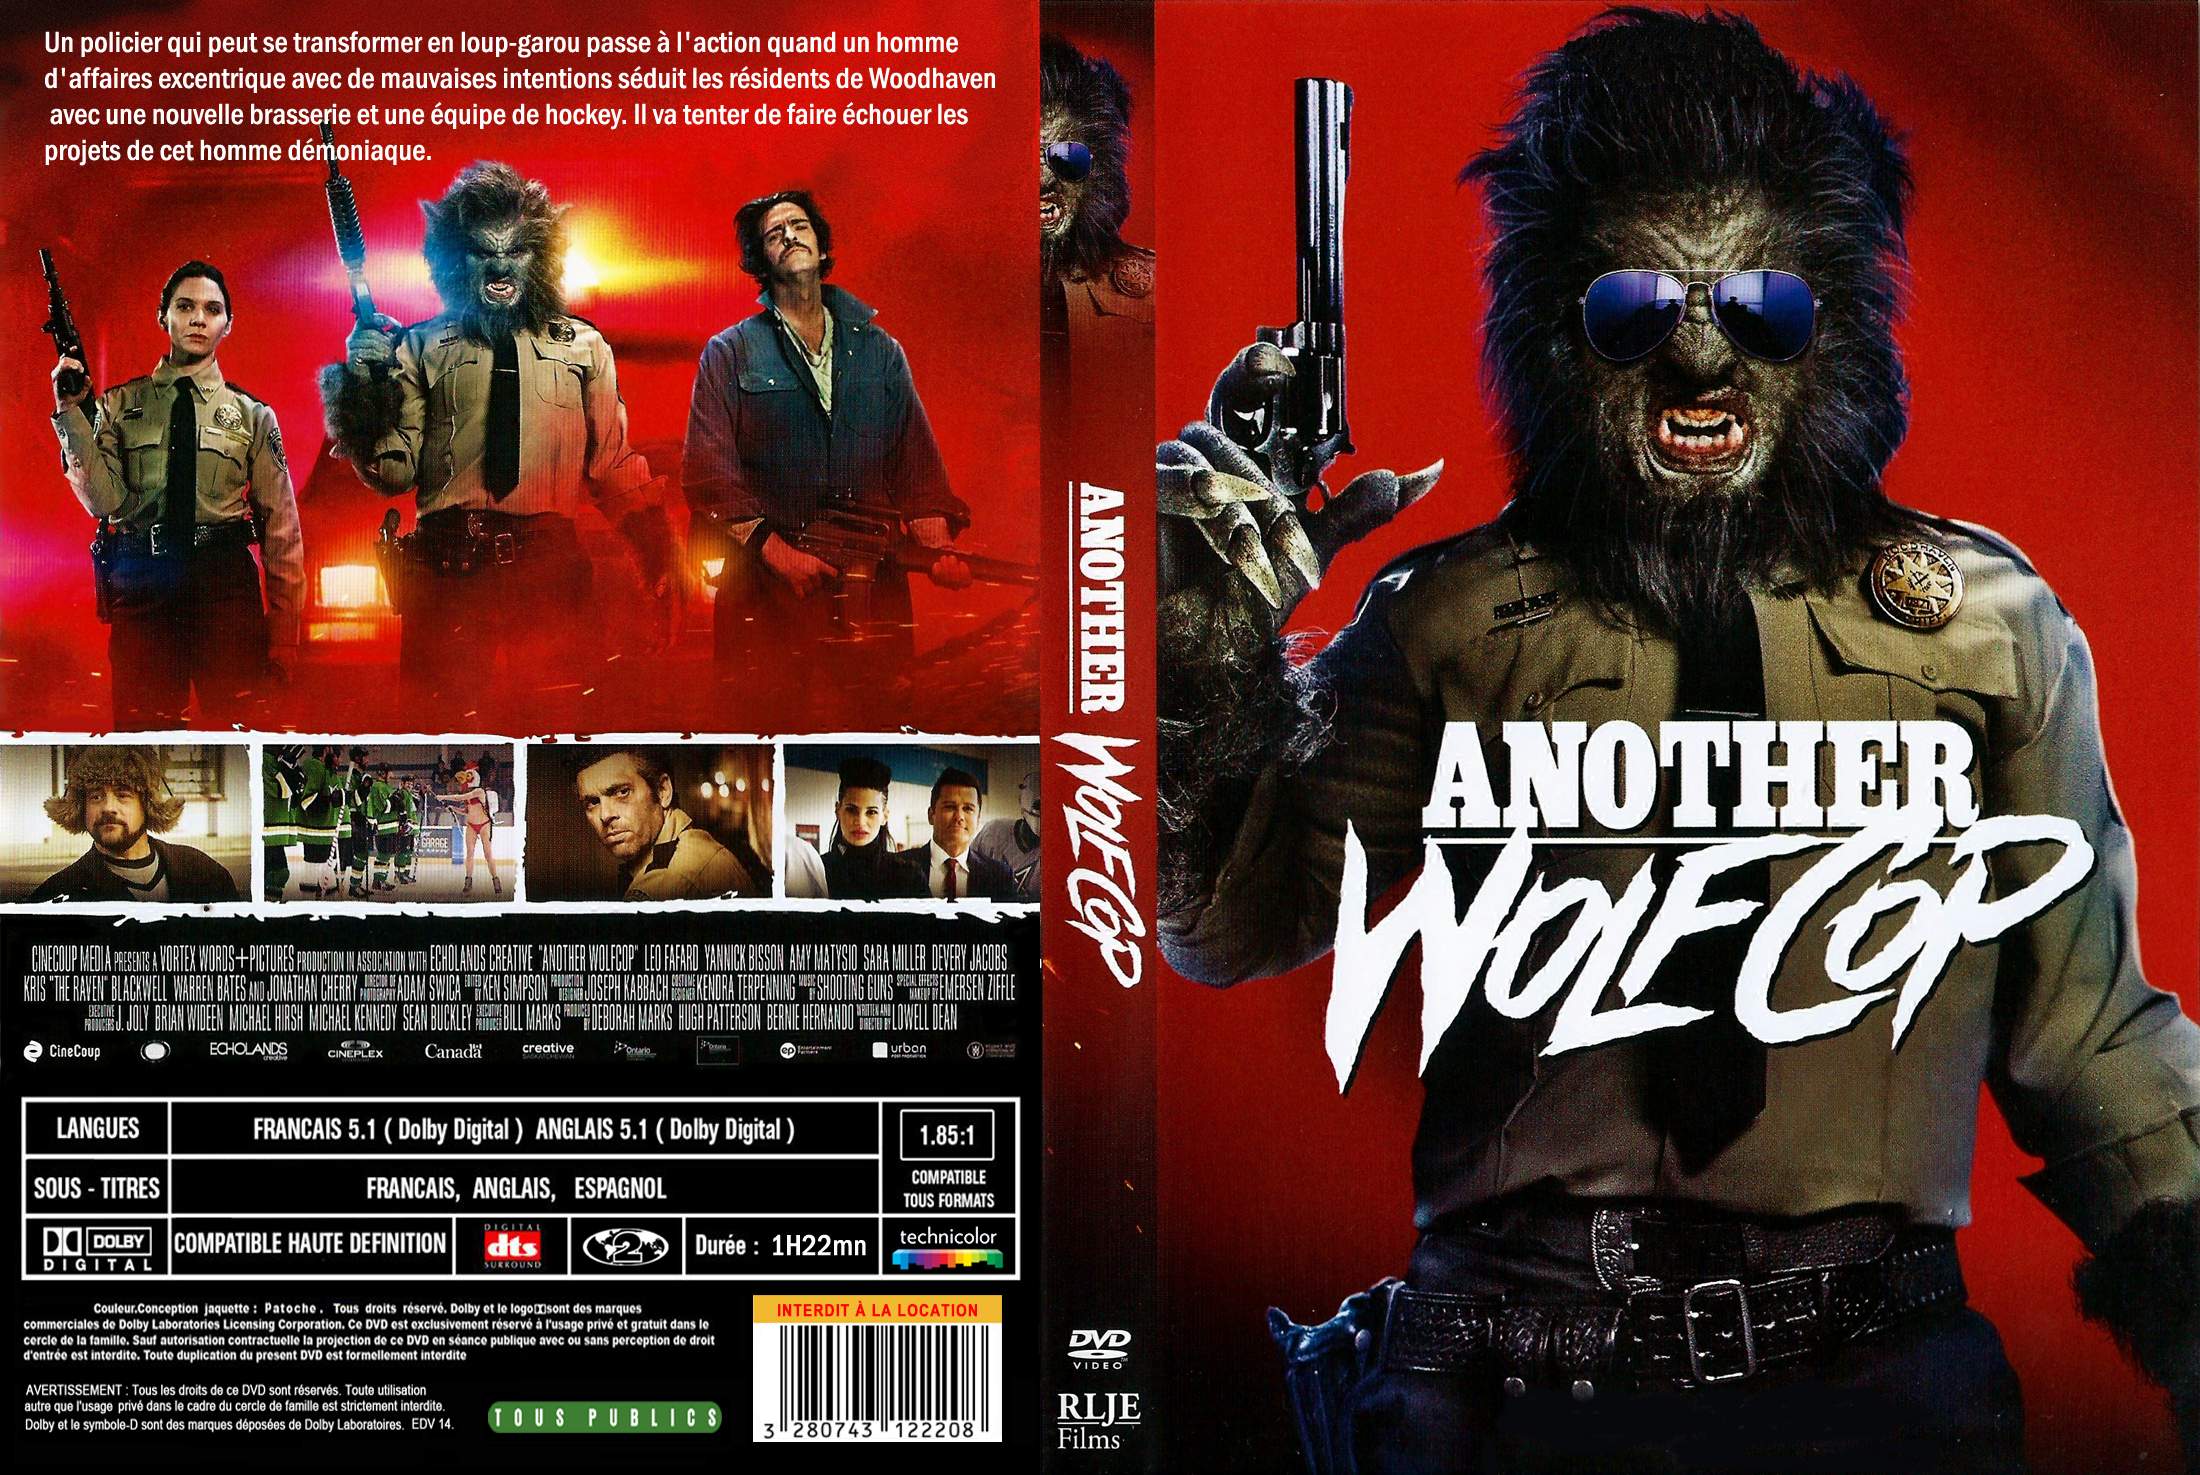 Jaquette DVD Another WolfCop custom